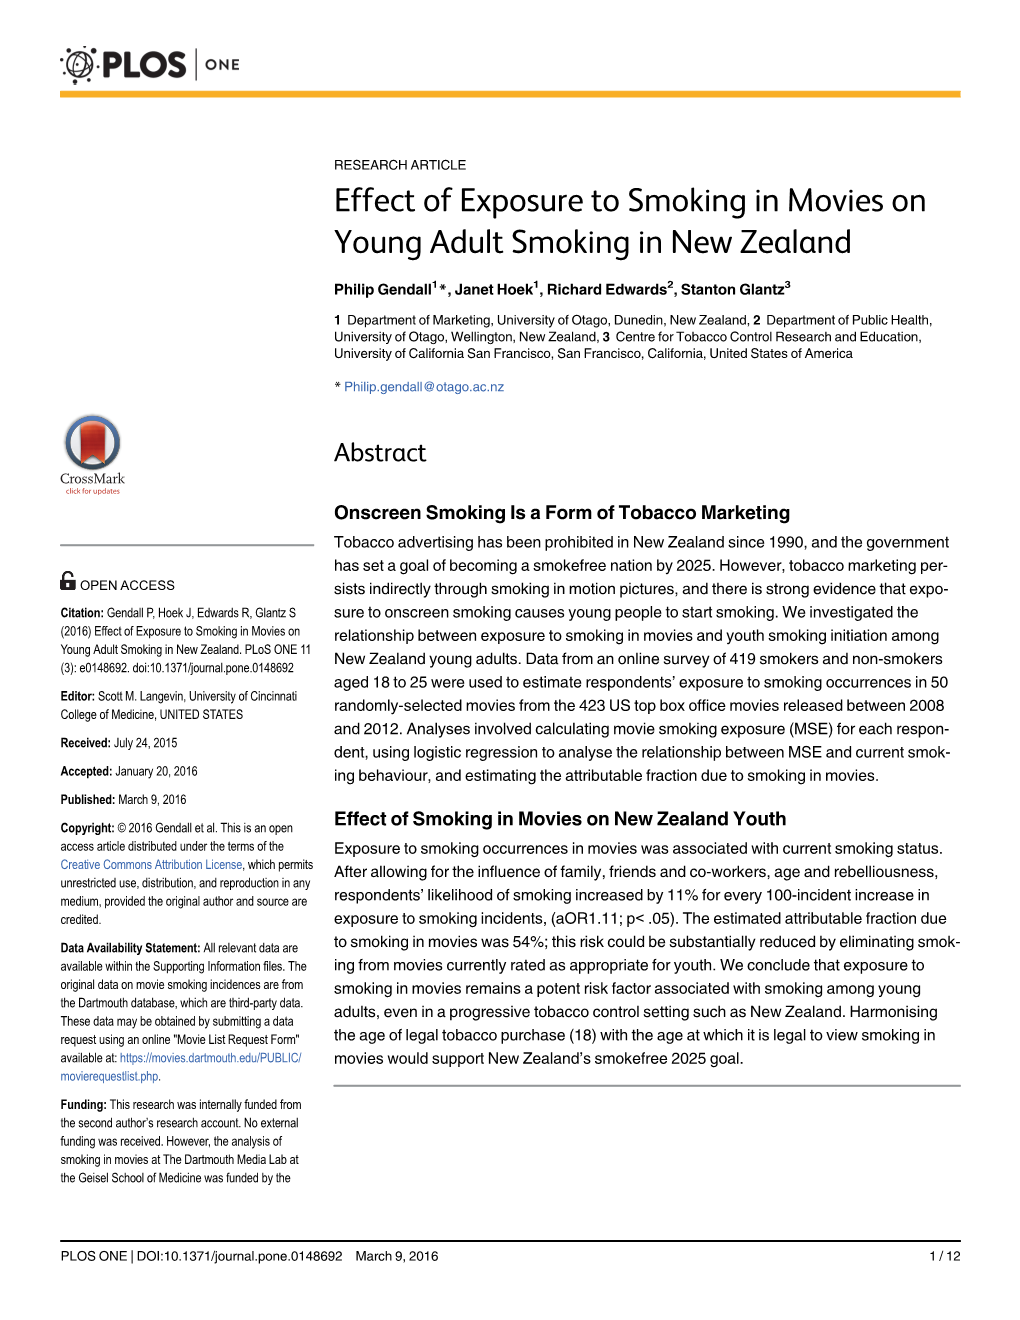 Effect of Exposure to Smoking in Movies on Young Adult Smoking in New Zealand